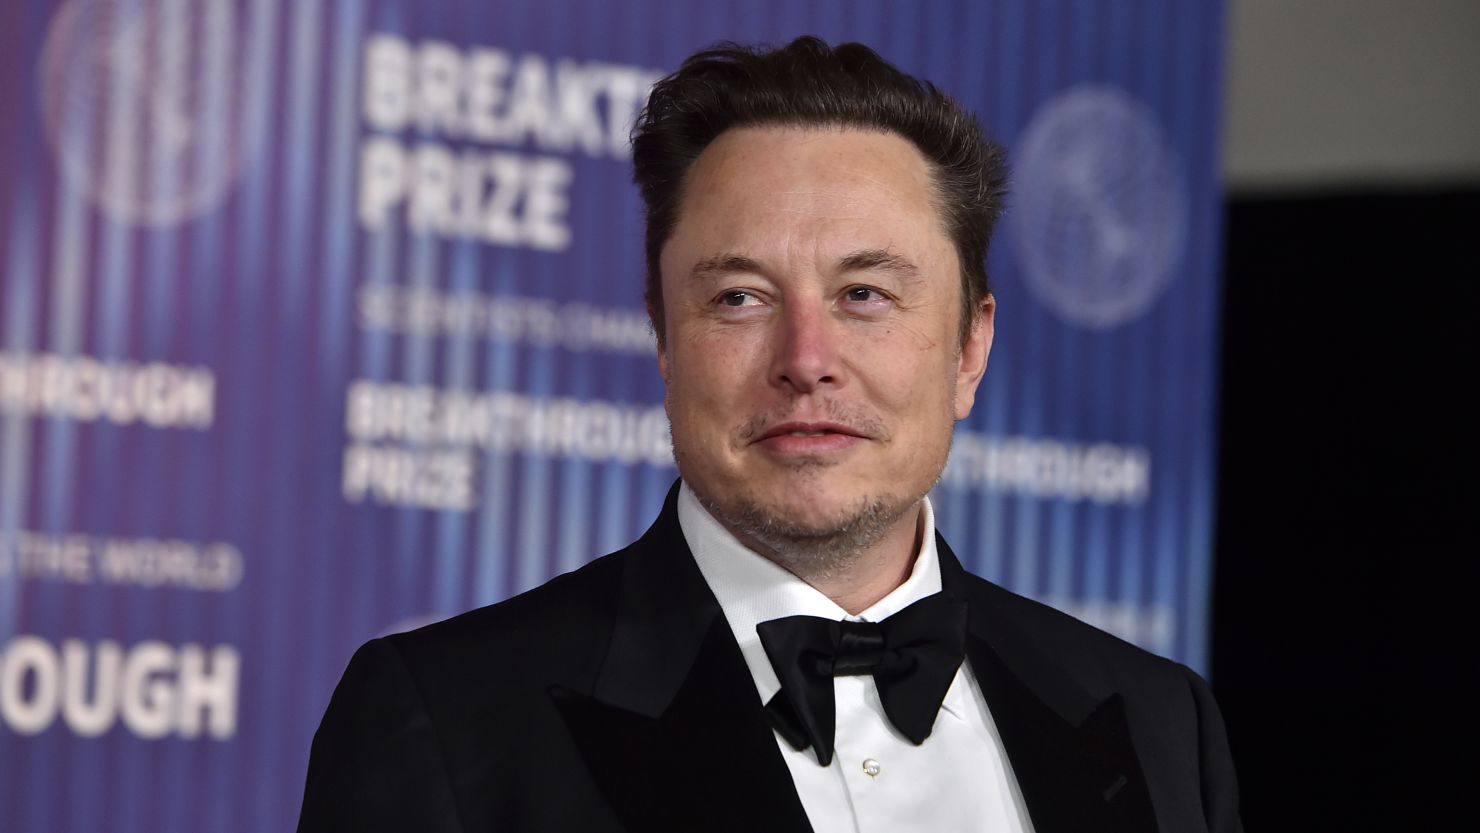 Elon Musk was due to arrive in India next week for a visit that was expected to include a meeting with Prime Minister Narendra Modi